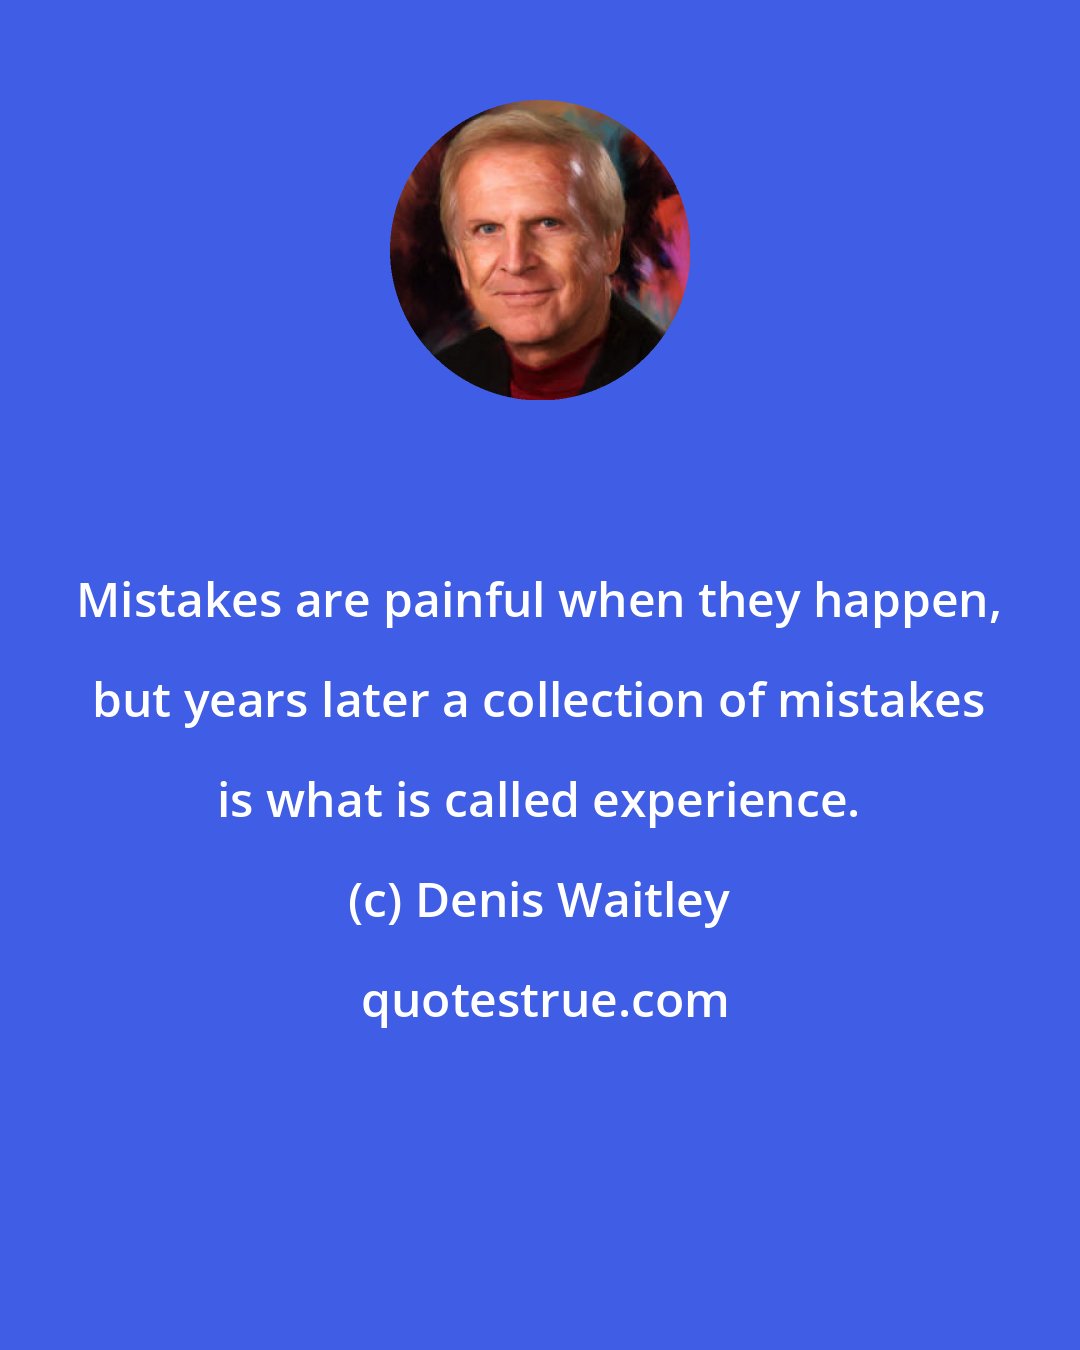 Denis Waitley: Mistakes are painful when they happen, but years later a collection of mistakes is what is called experience.